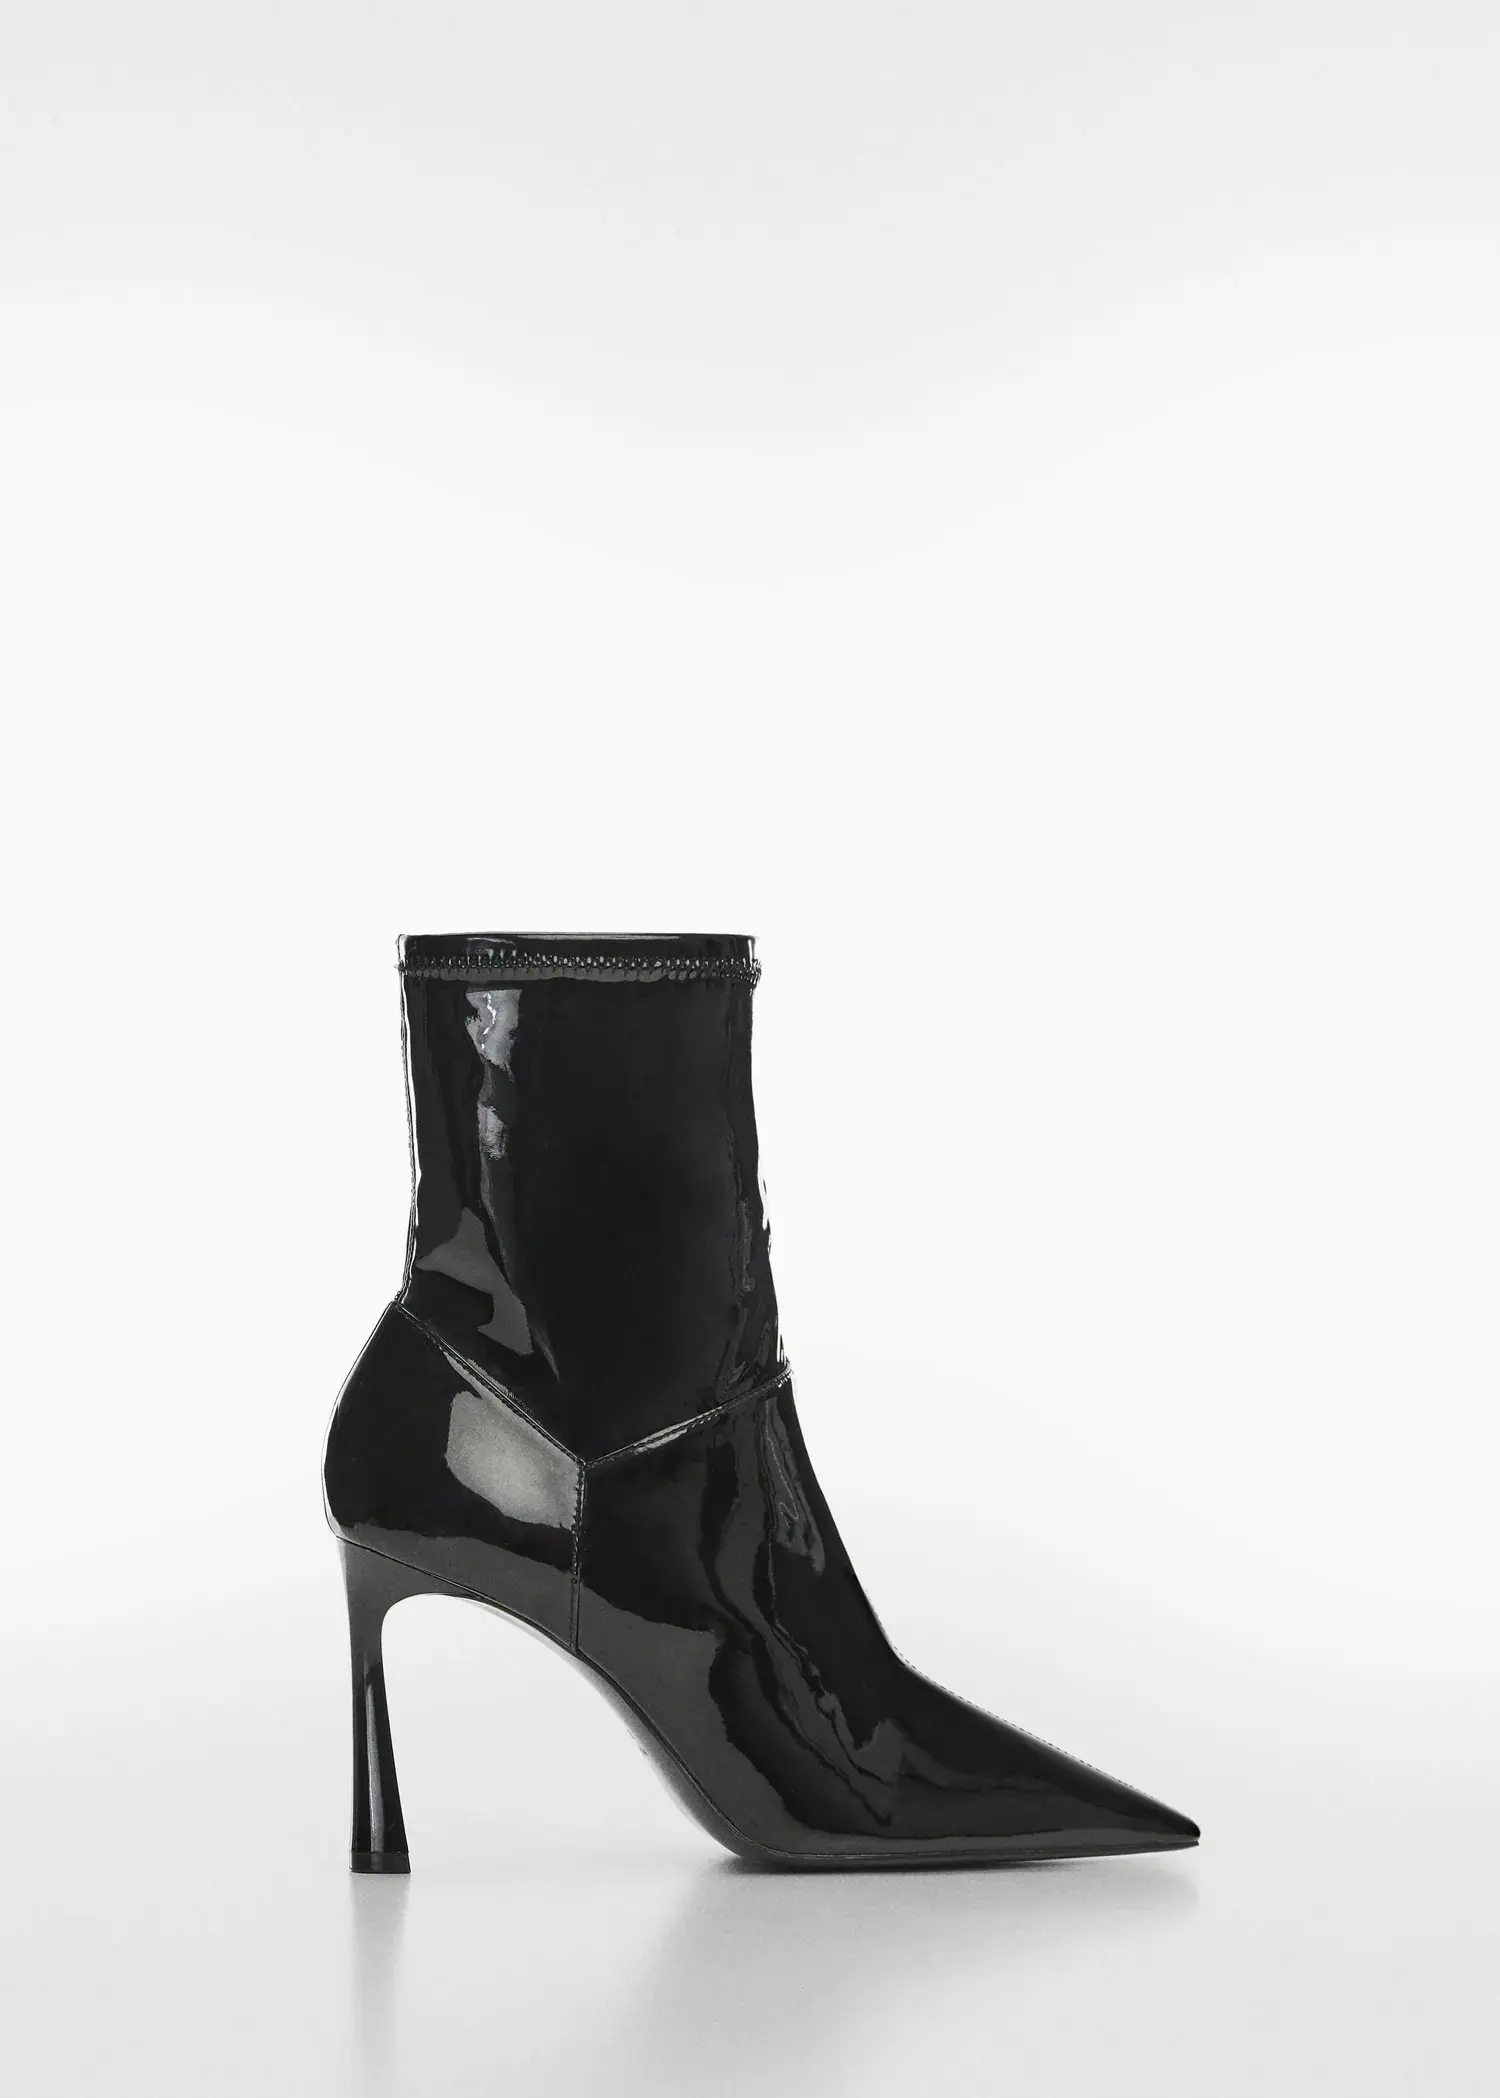 Mango Patent leather-effect heeled ankle boots. 1